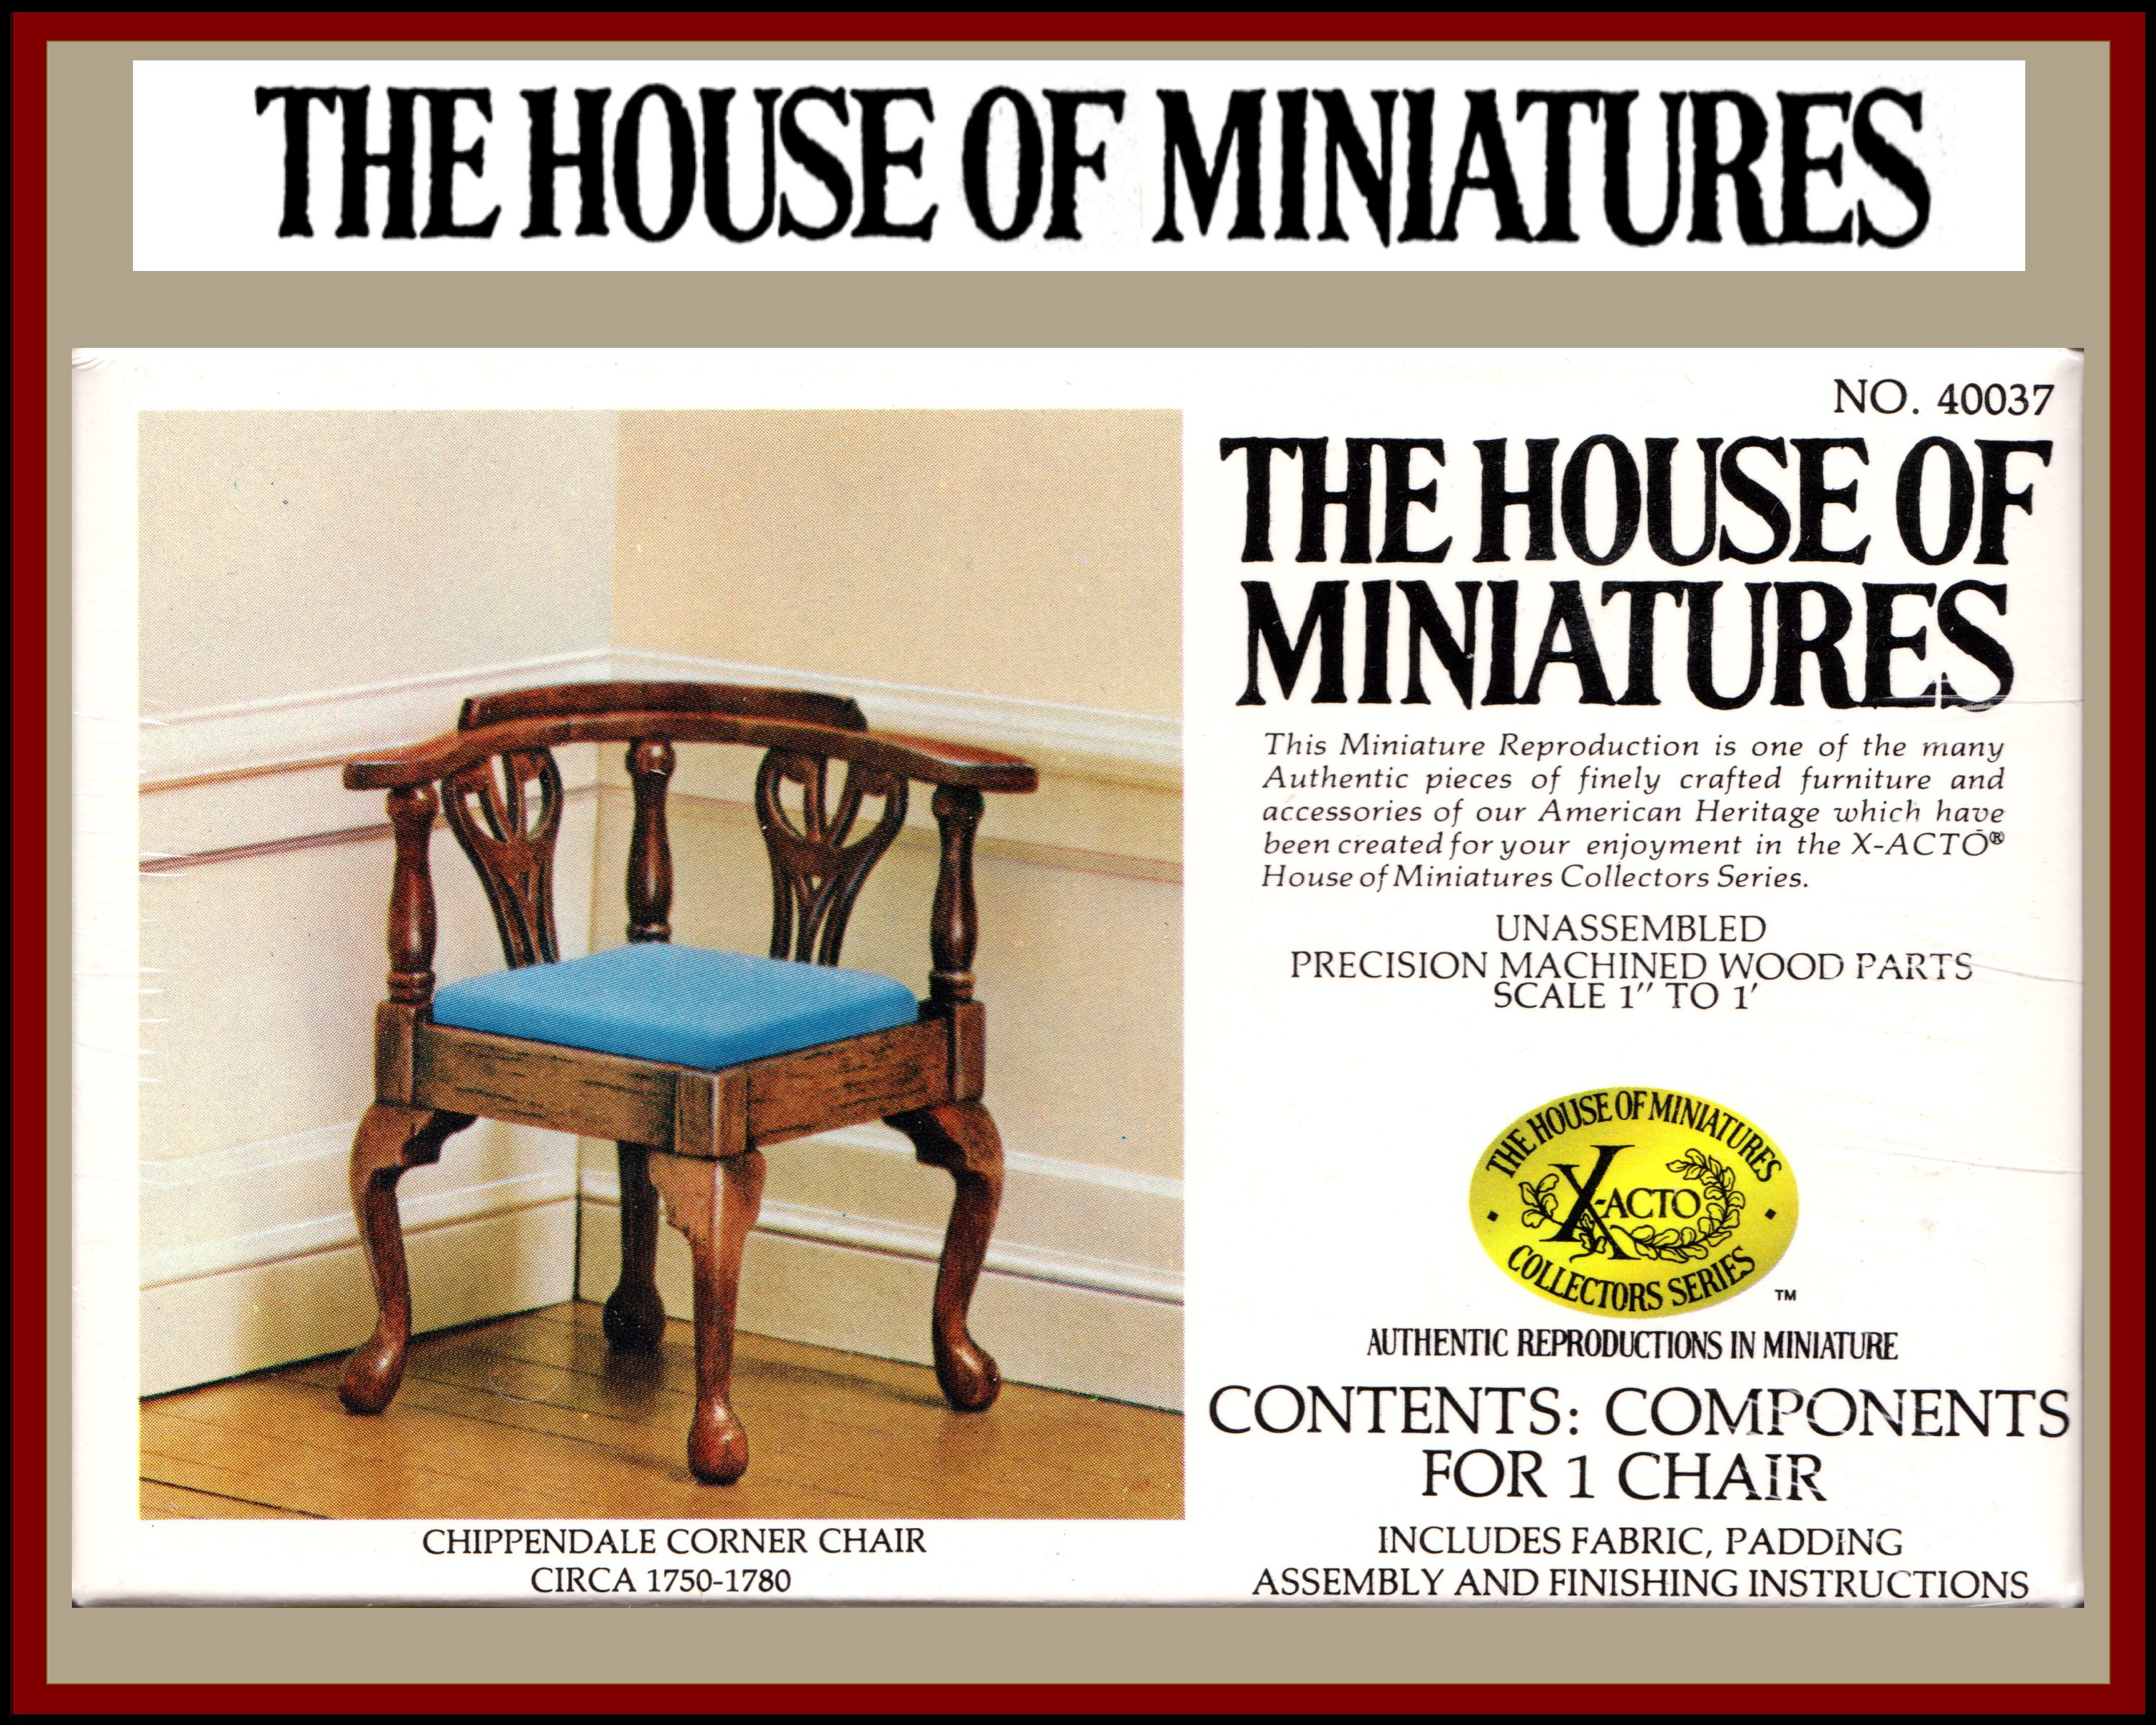 1/12 CHIPPENDALE NIGHT STAND KIT #40012 THE HOUSE OF MINIATURES NEW SEALED 